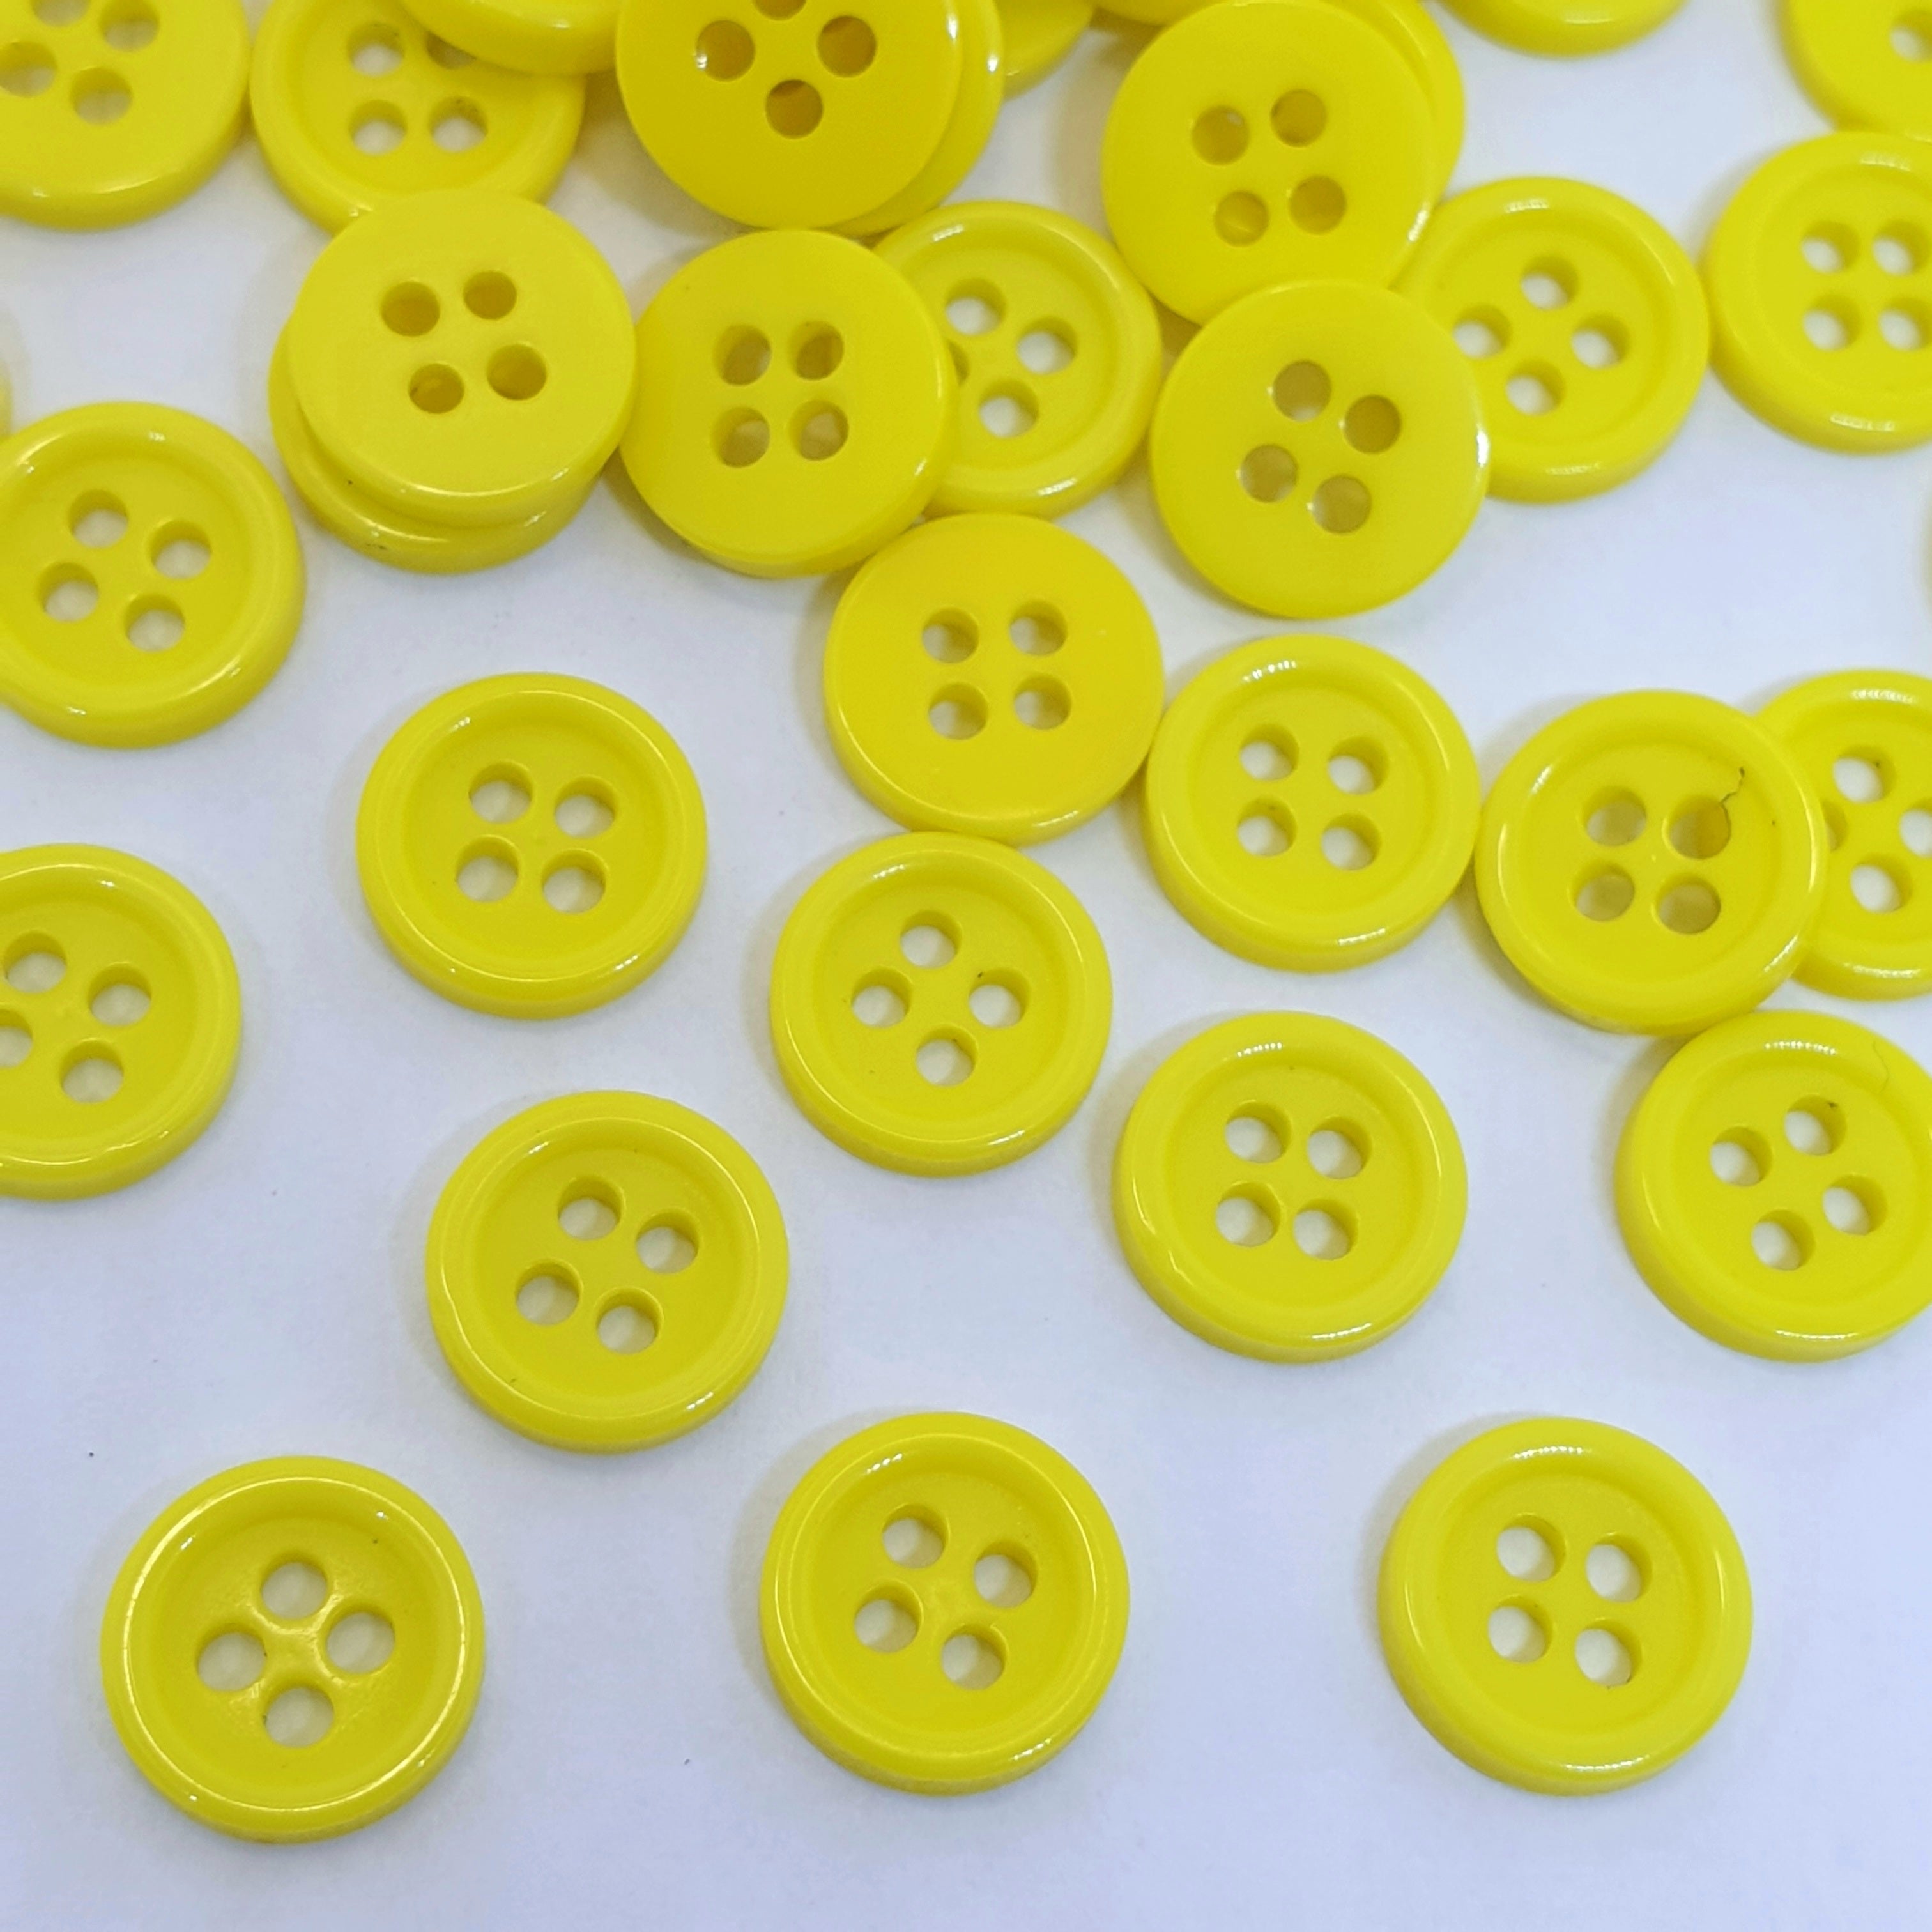 MajorCrafts 120pcs 9mm Chartreuse Yellow 4 Holes Small Round Resin Sewing Buttons